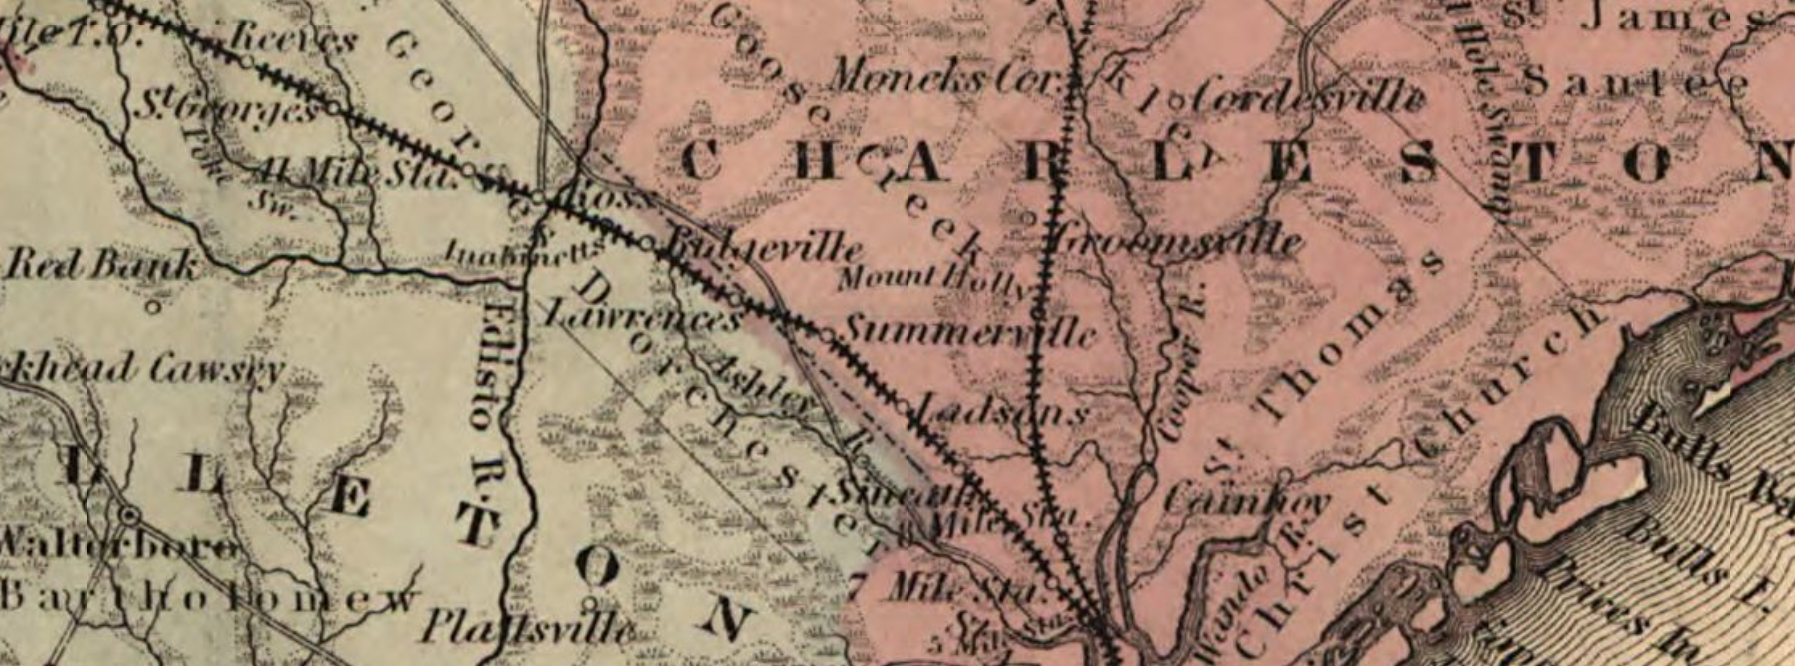 Enlargement of map of Summerville, S.C. (ca. 1855). Courtesy of the LOC